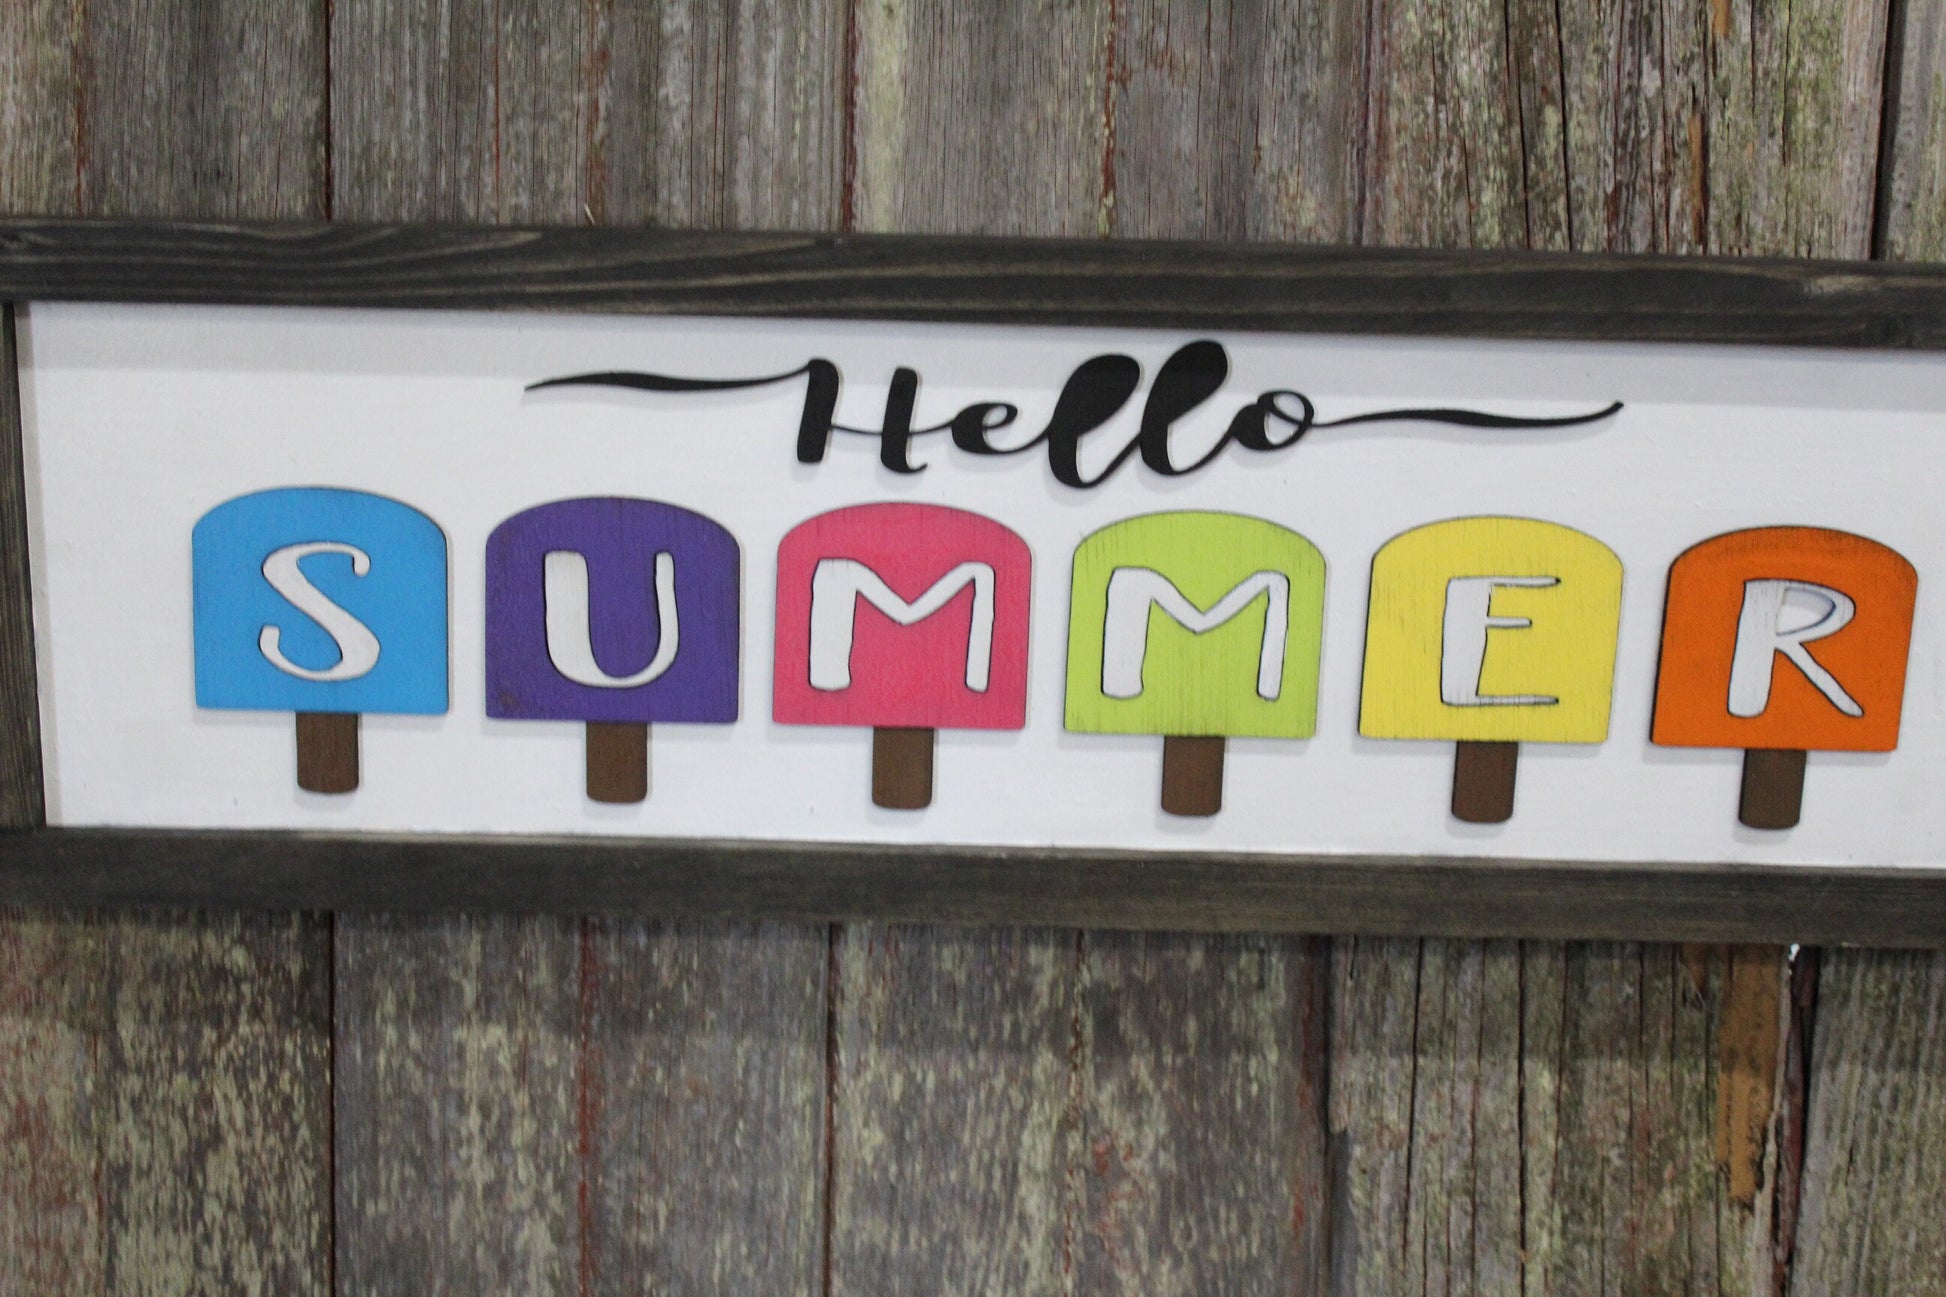 Hello Summer Wood Sign 3D Raised Text Image Bright Popsicles Ice Pops Ice Cream Fun Farmhouse Handmade Sign Rustic Primitive